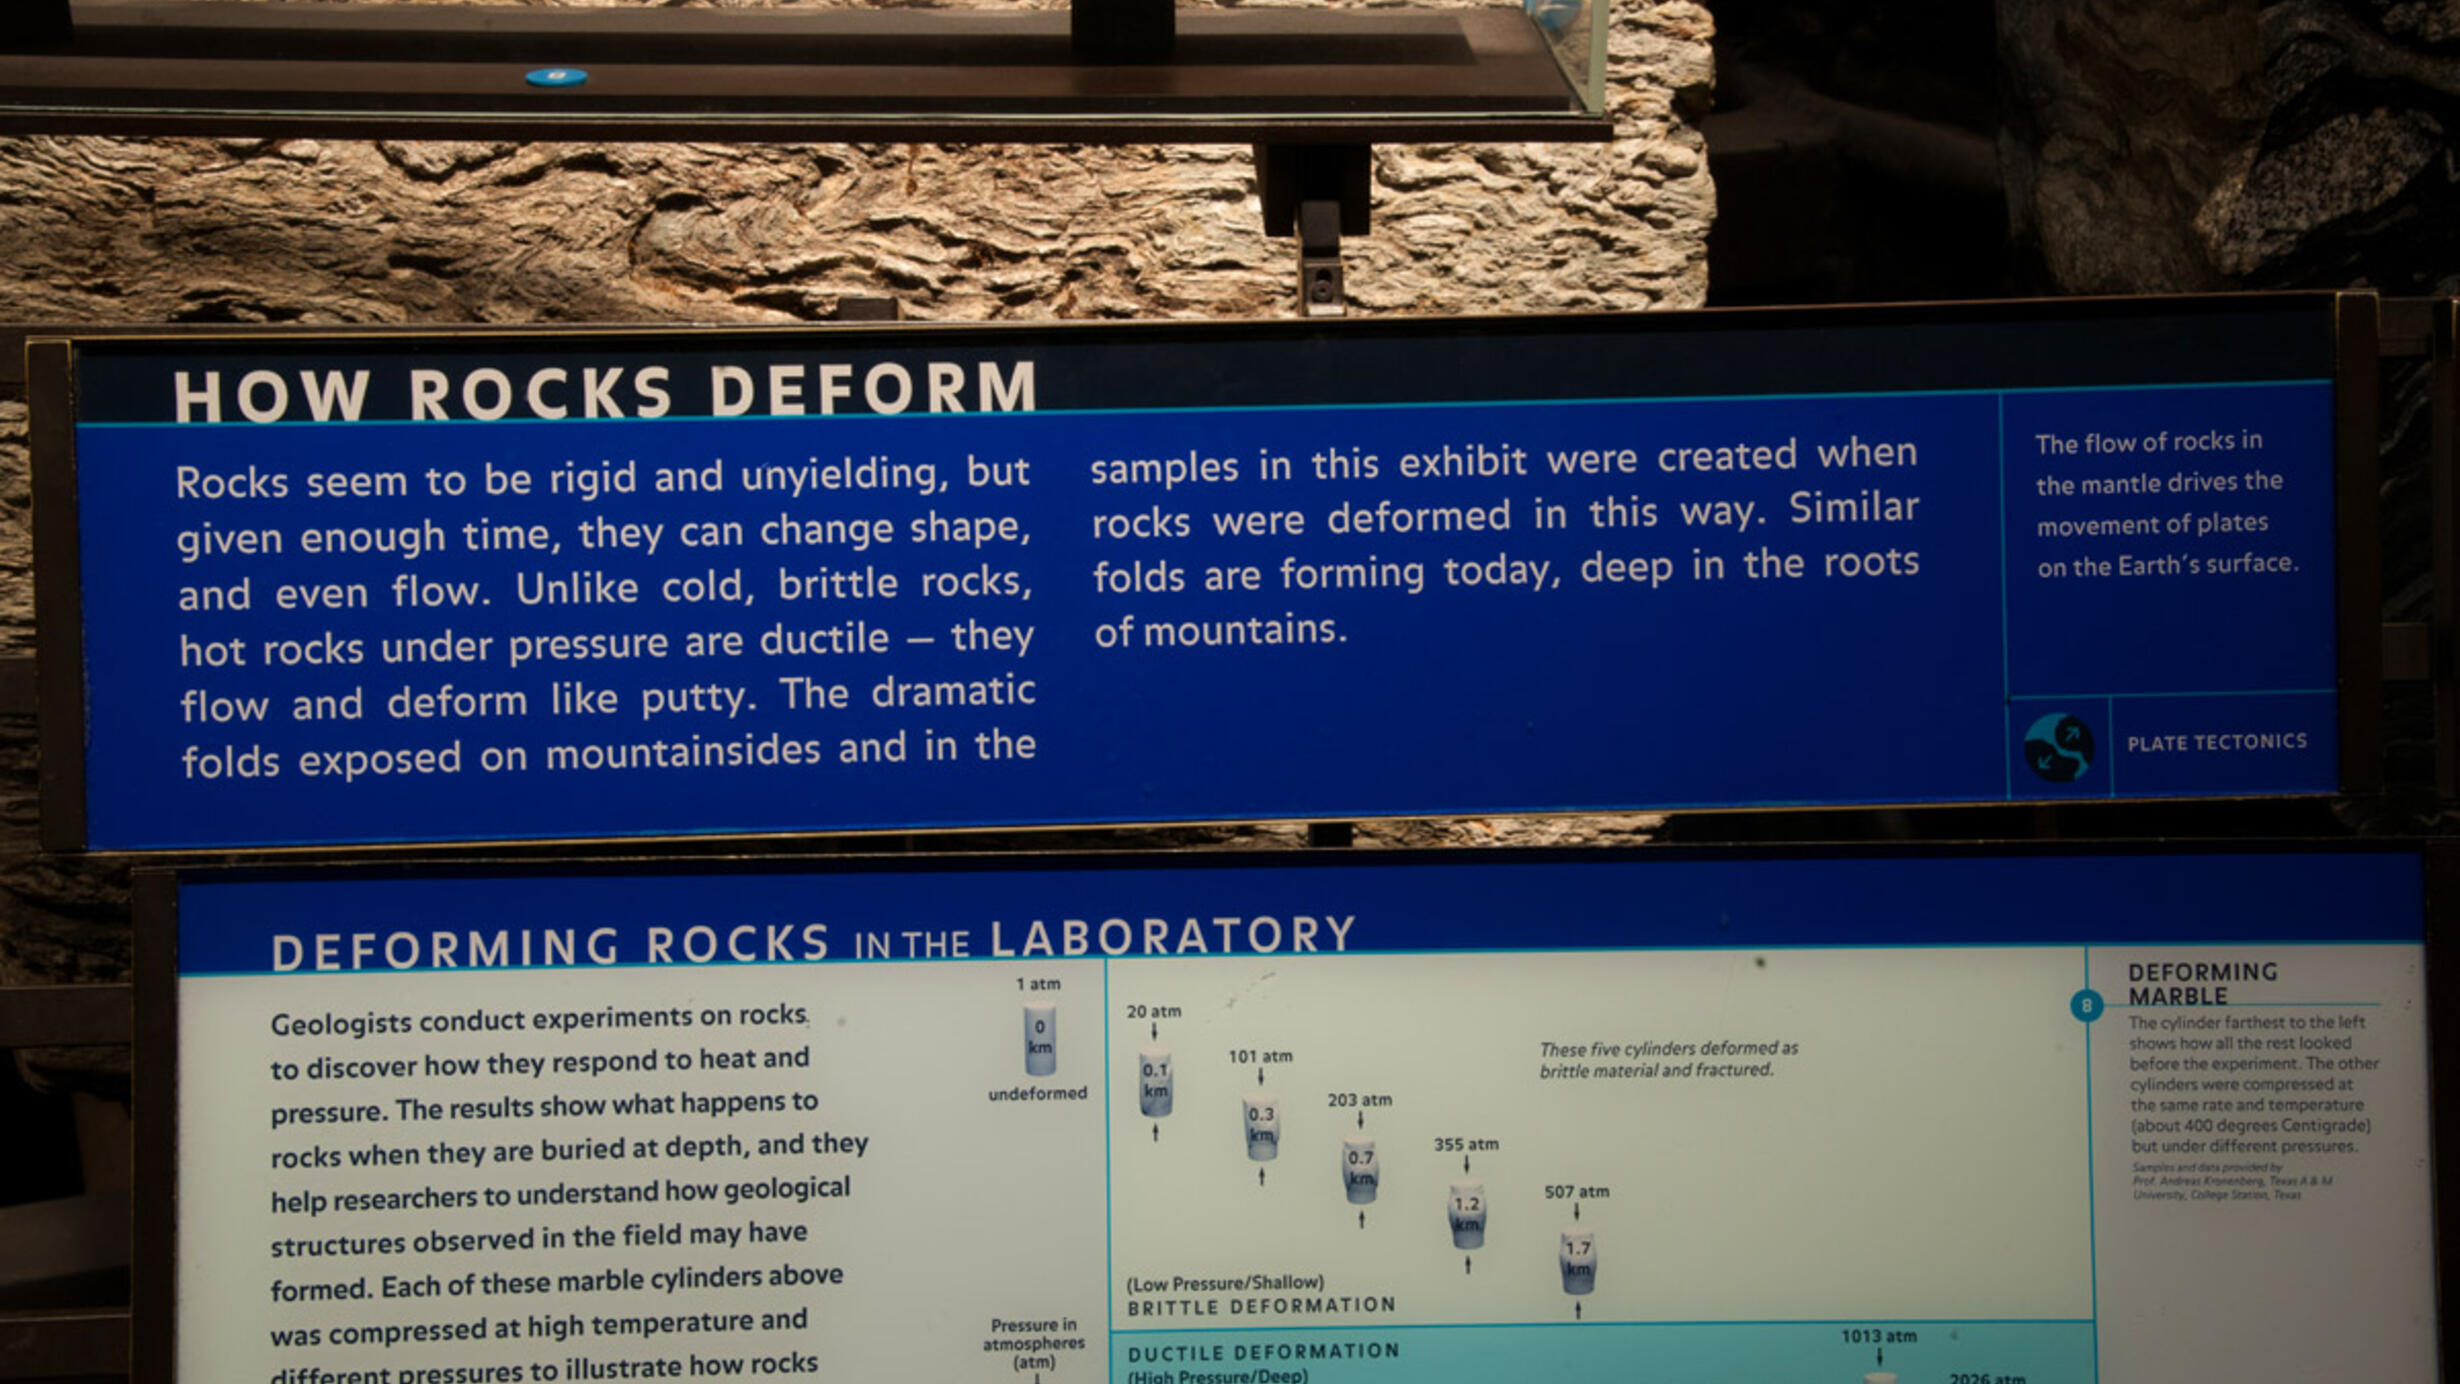 In the Museum's Hall of Planet Earth, a specimen and an explanation panel about how rocks deform under heat and pressure.